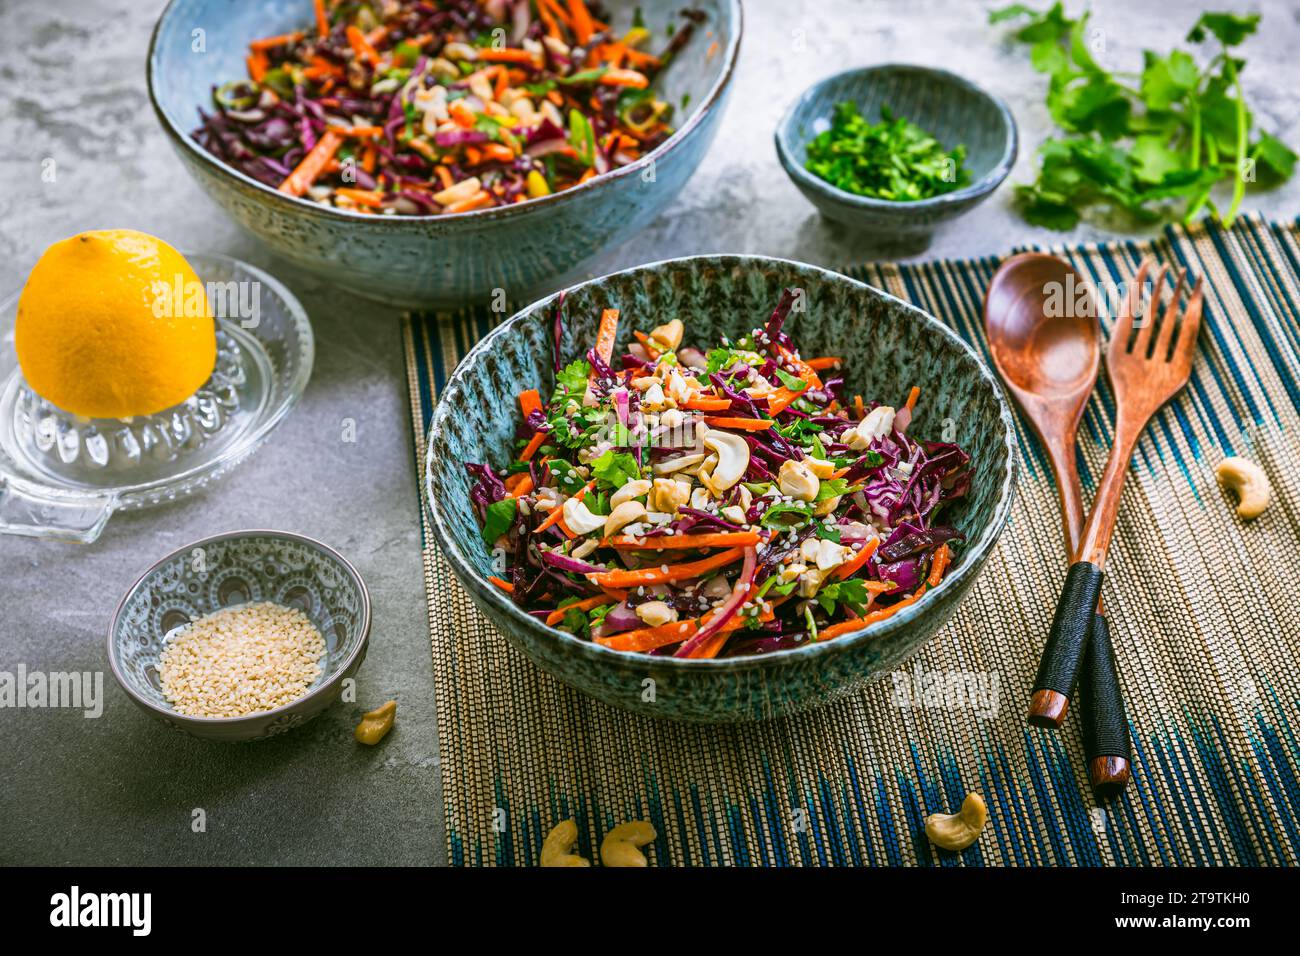 Red cabbage salad in Asian style with carrots, cilantro, cashew nuts and onions Stock Photo